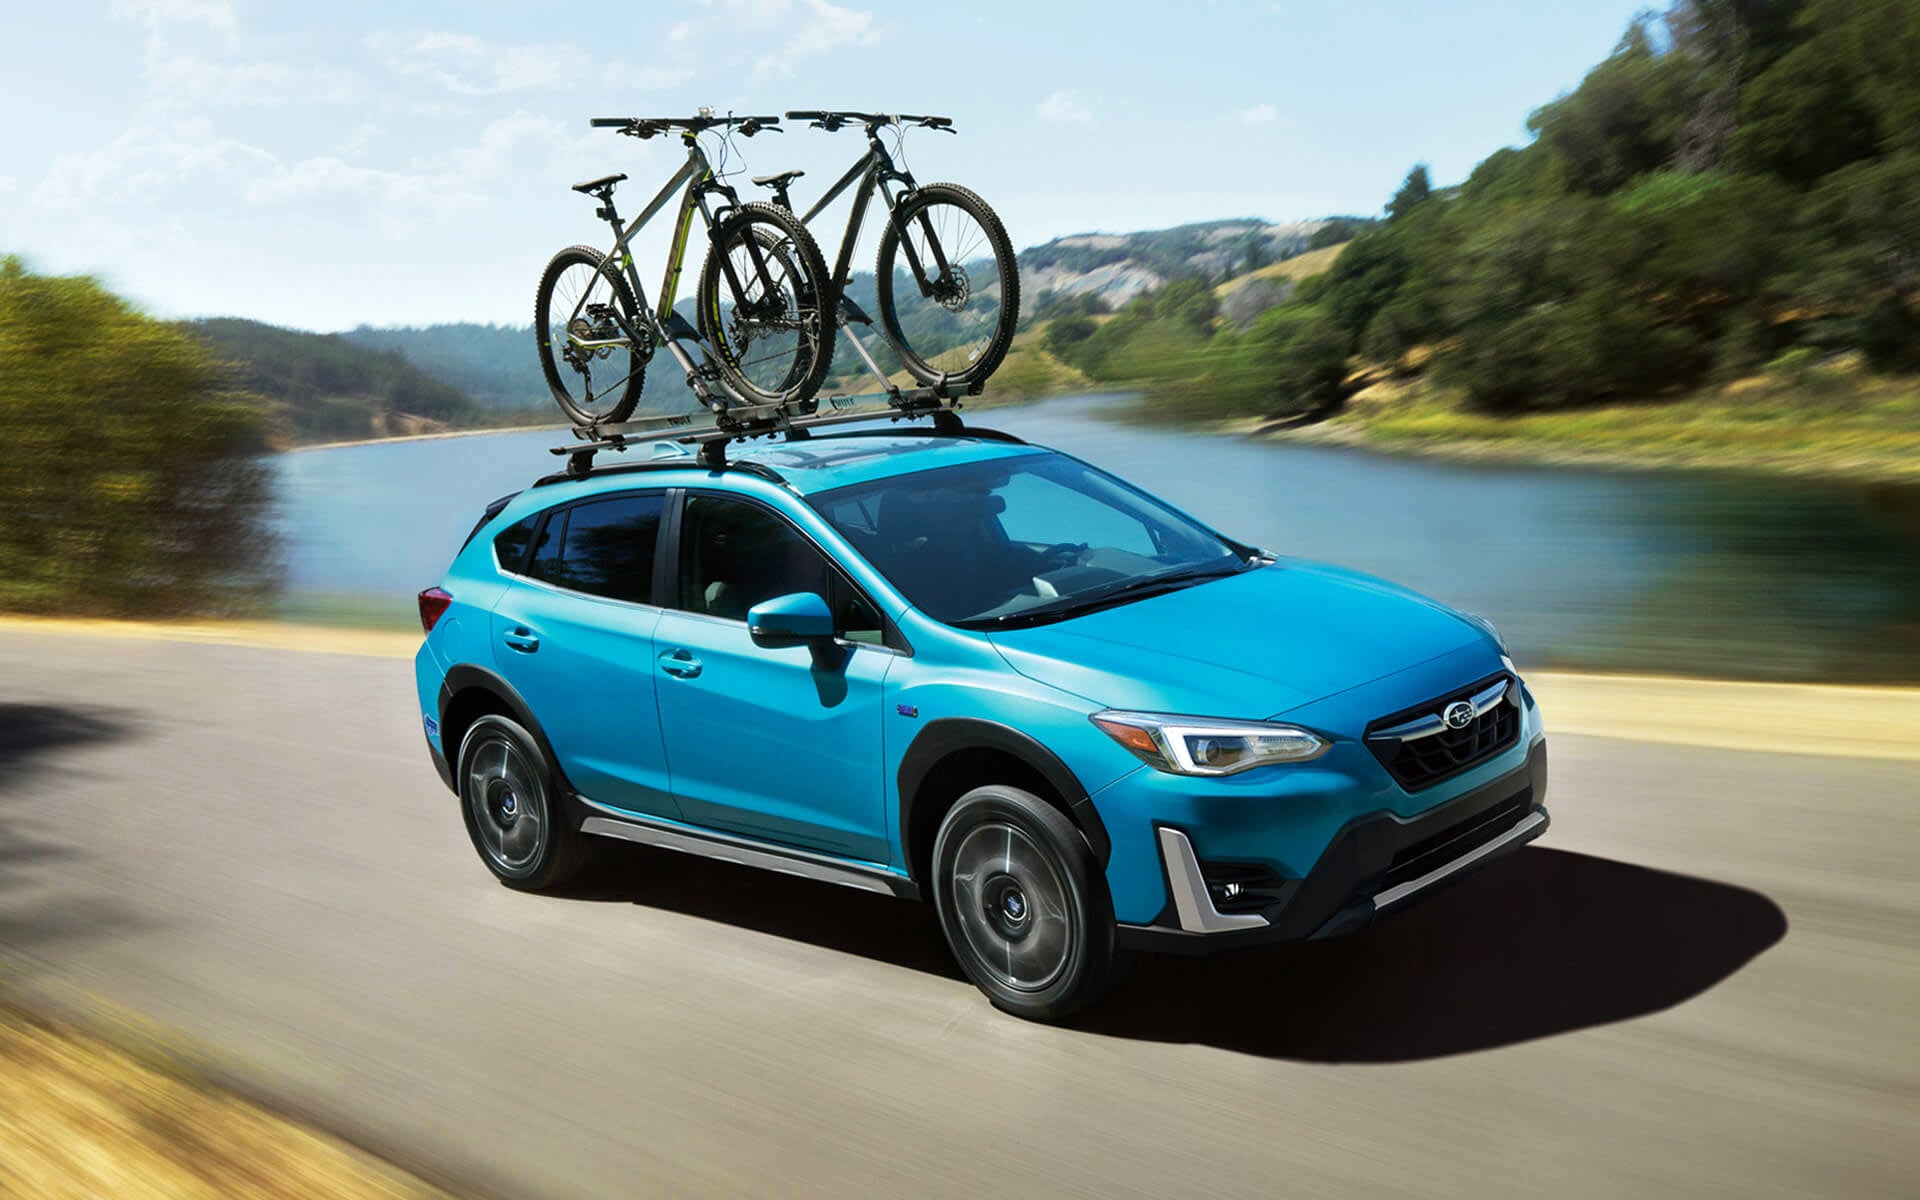 A blue Crosstrek Hybrid with two bicycles on its roof rack driving beside a river | Sunset Hills Subaru in Sunset Hills MO